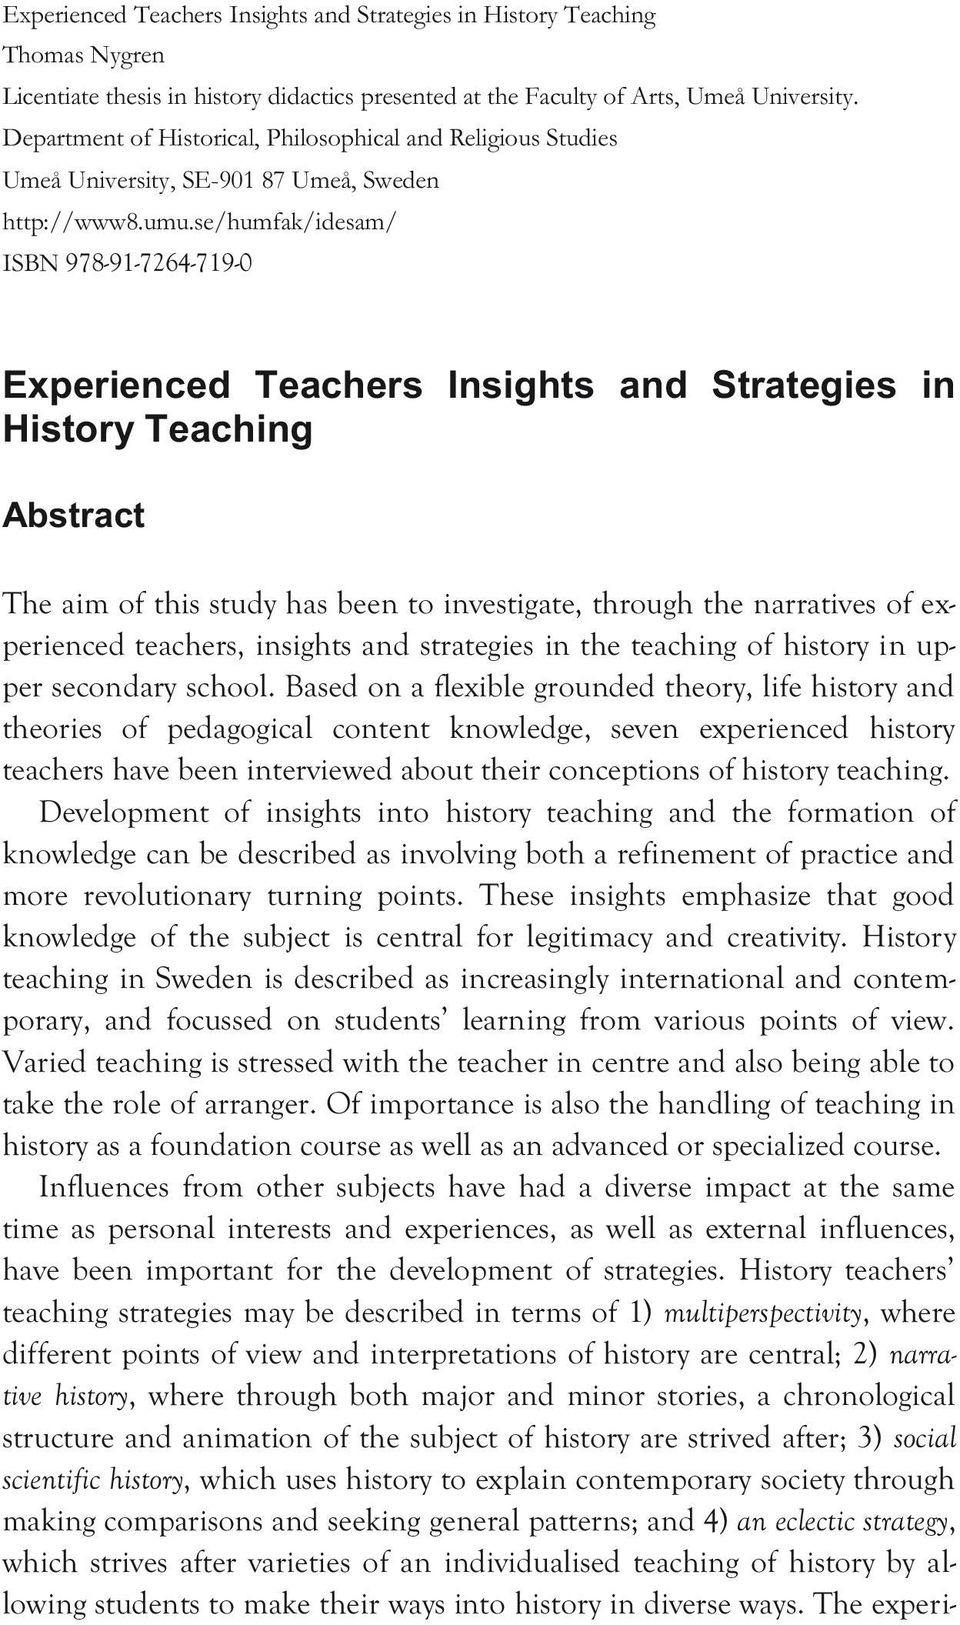 se/humfak/idesam/ ISBN 978-91-7264-719-0 Experienced Teachers Insights and Strategies in History Teaching Abstract The aim of this study has been to investigate, through the narratives of experienced